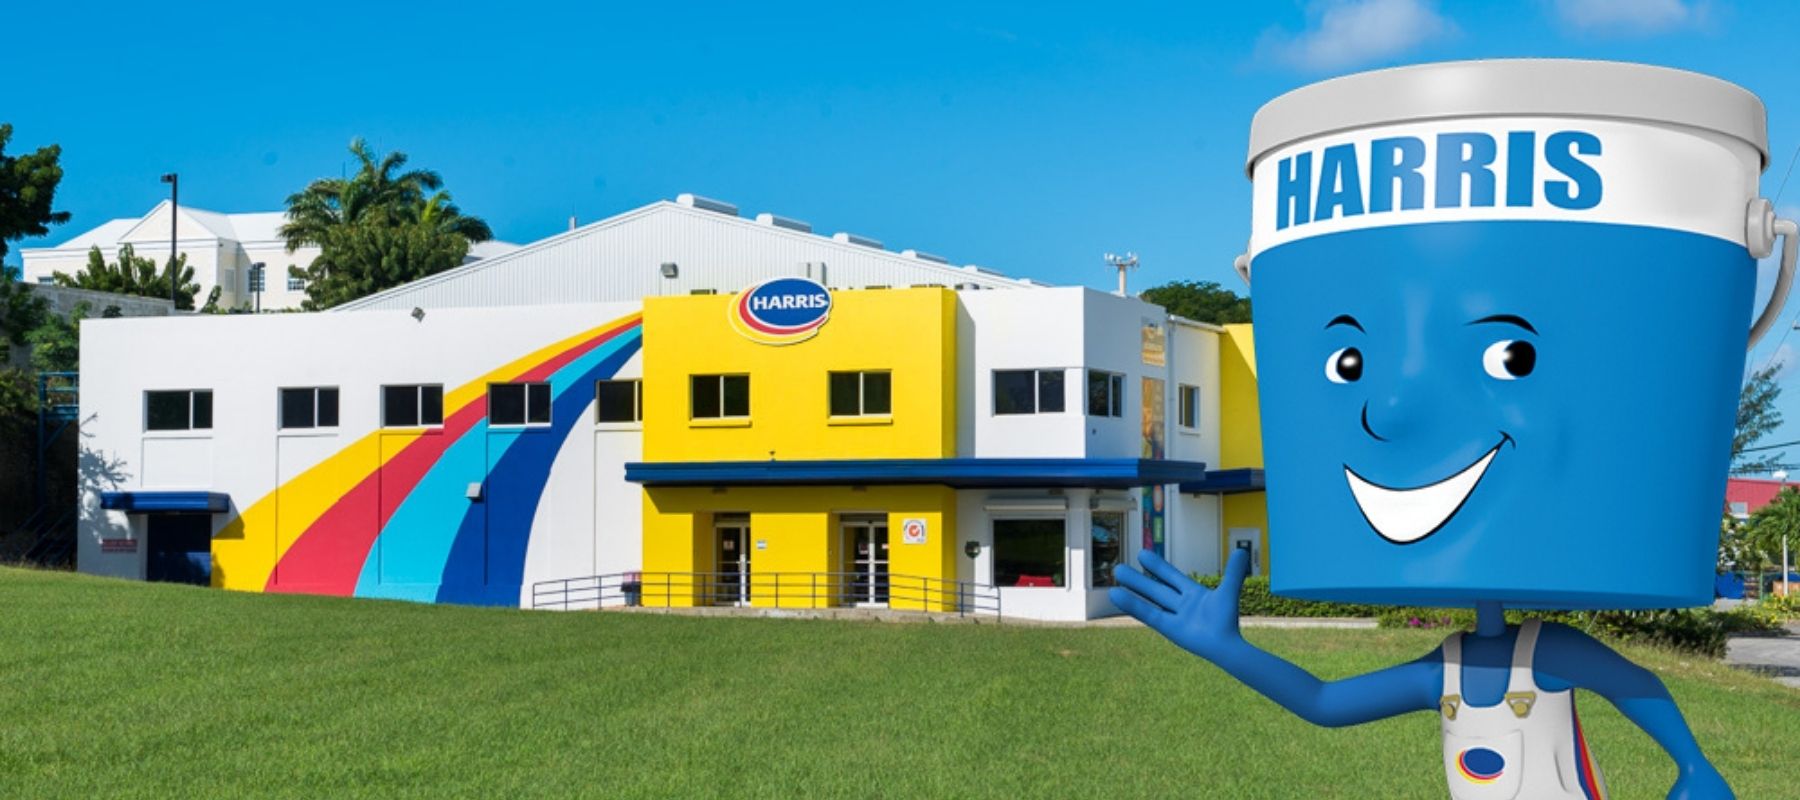 Harris Paints manufactuing facility with little blue man overlayed on top waving